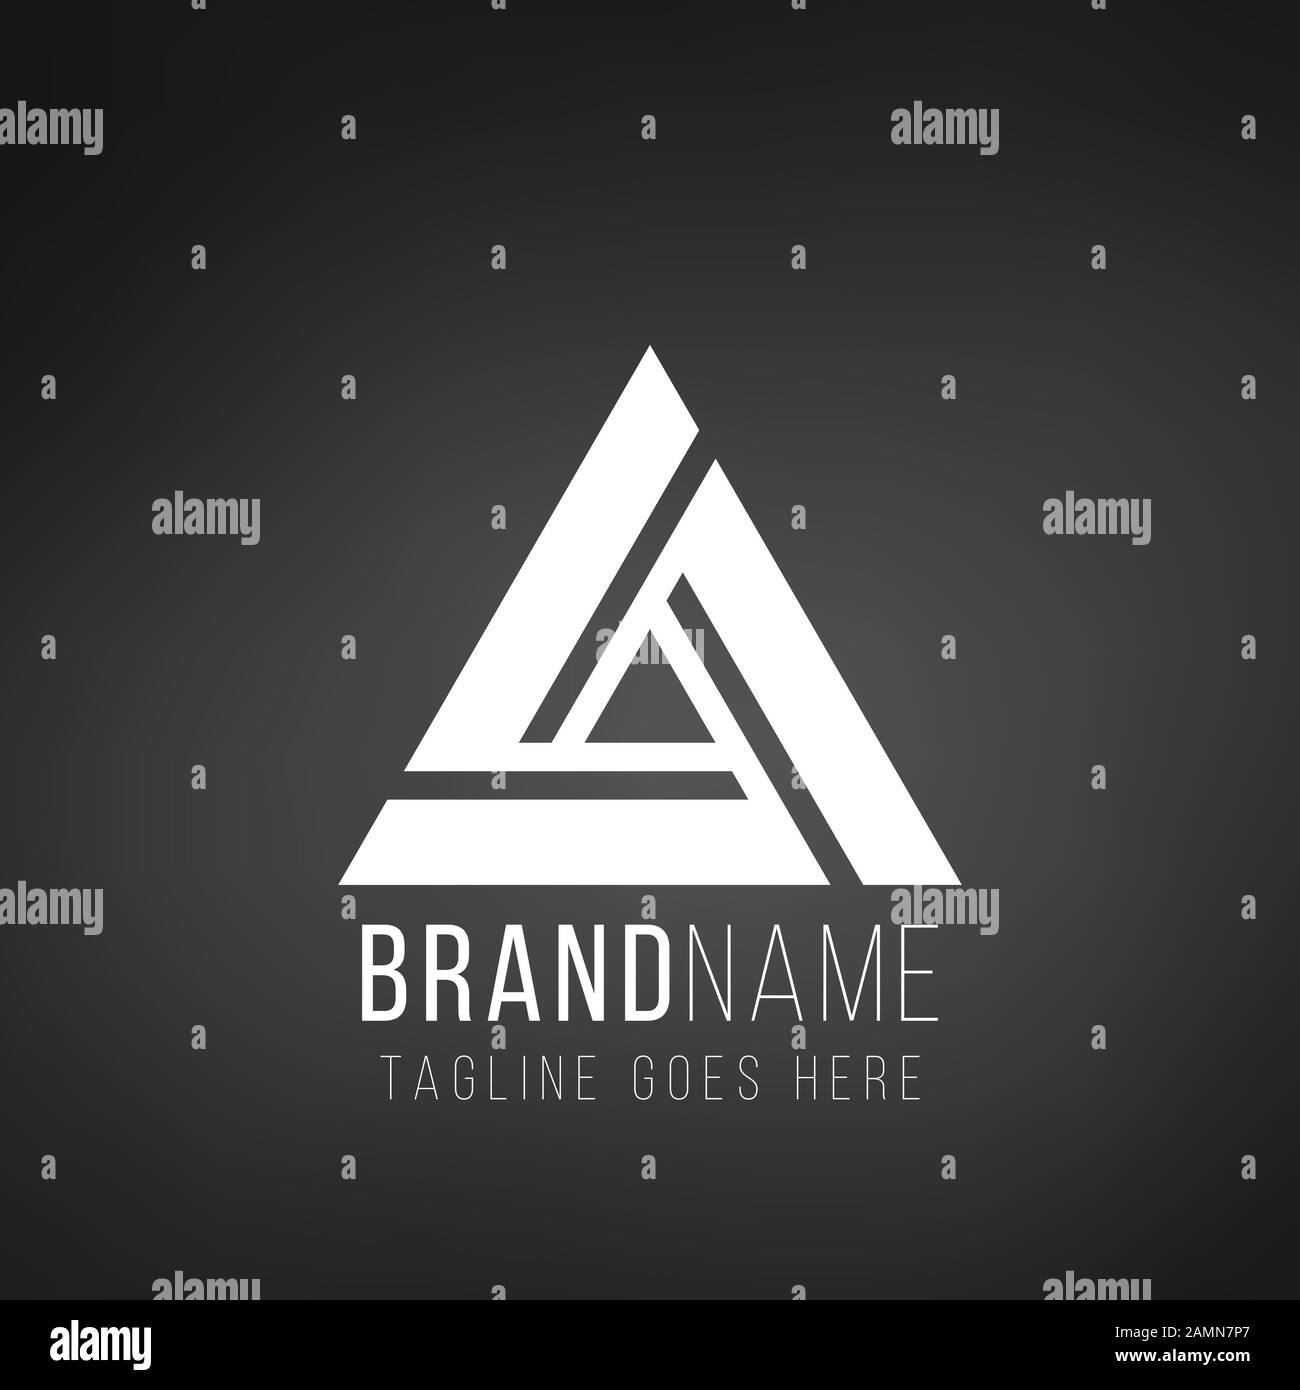 Geometric triangle logo design. business identity concept. Creative corporate template. Stock Vector illustration isolated on black background Stock Vector